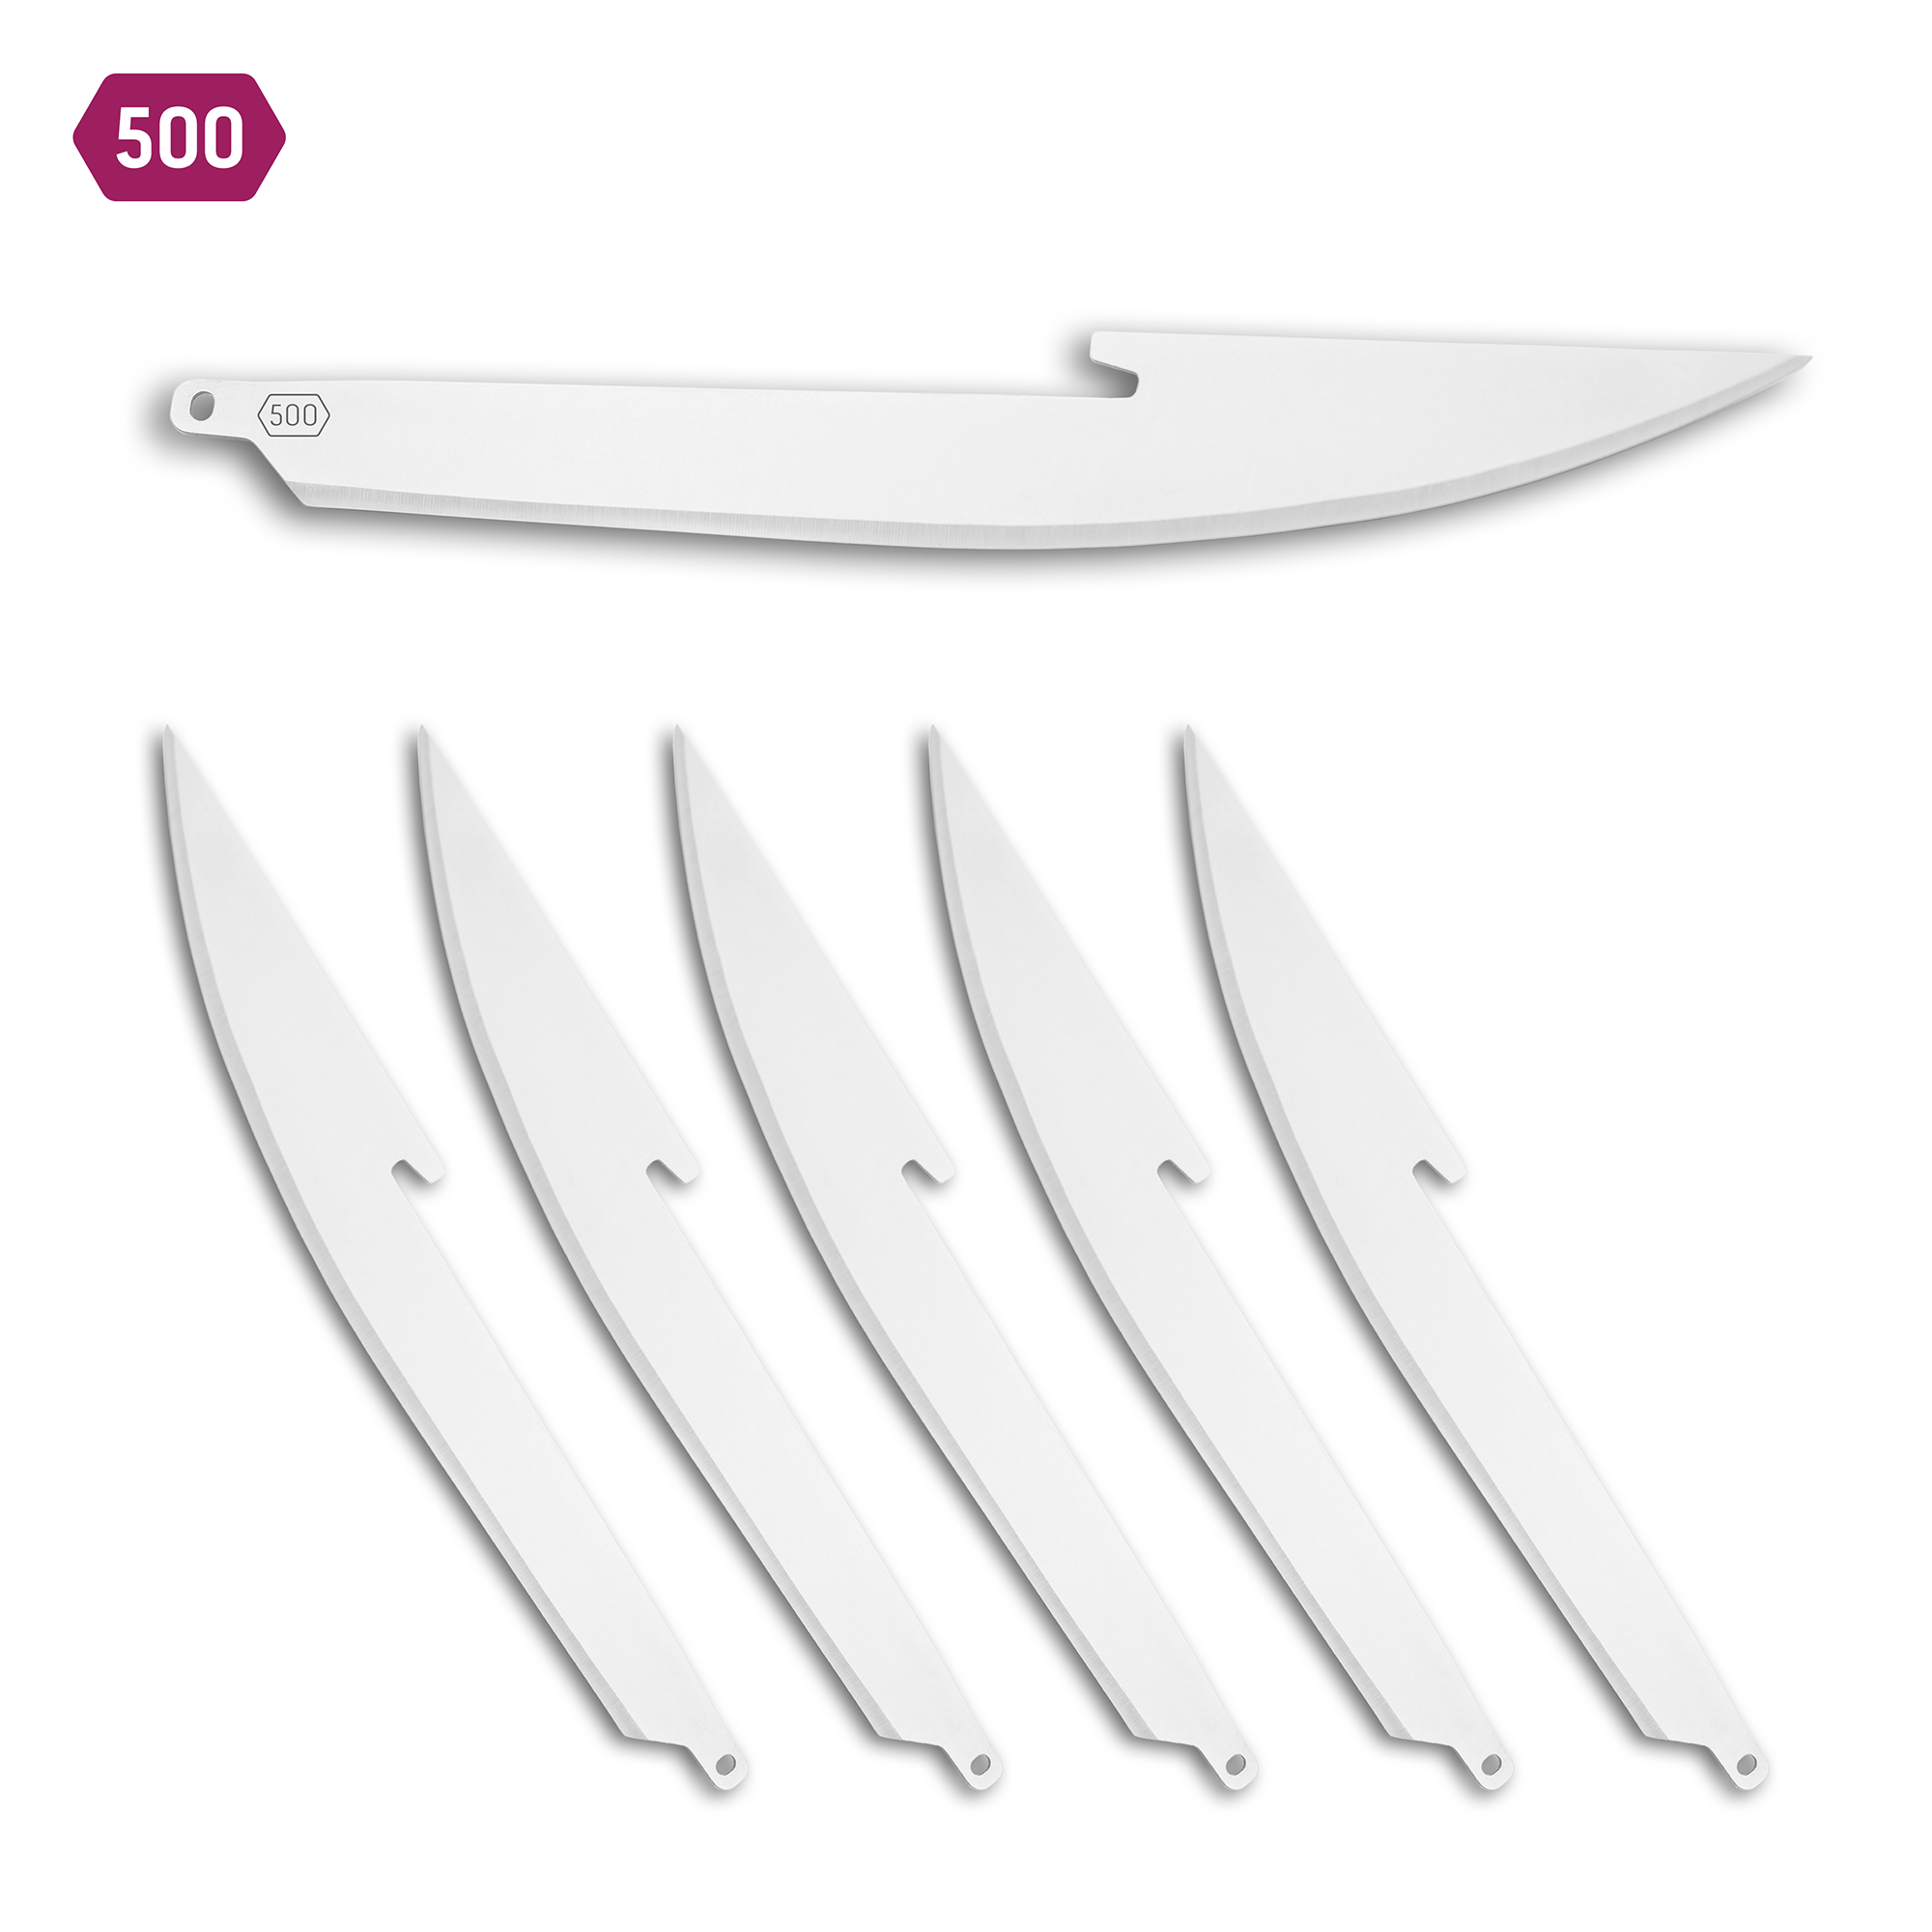 Outdoor Edge 3.5 RazorSafe Replacement Sharp-Point Knife Blades, 24 Piece  Value 743404201955